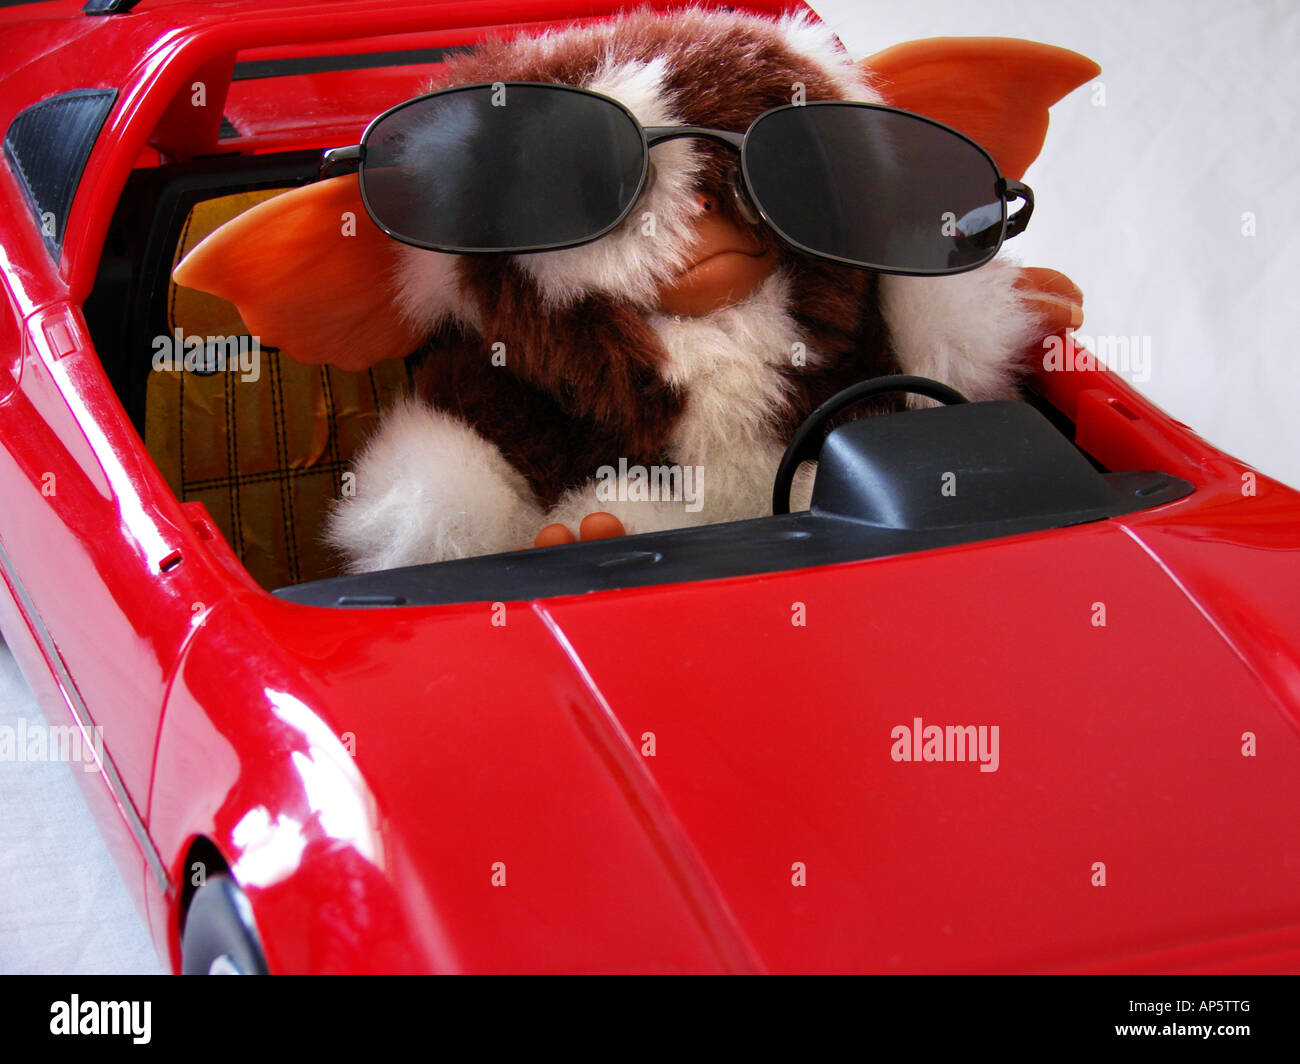 Gizmo the Gremlin Driving a Red Car wearing Sunglasse's Stock Photo